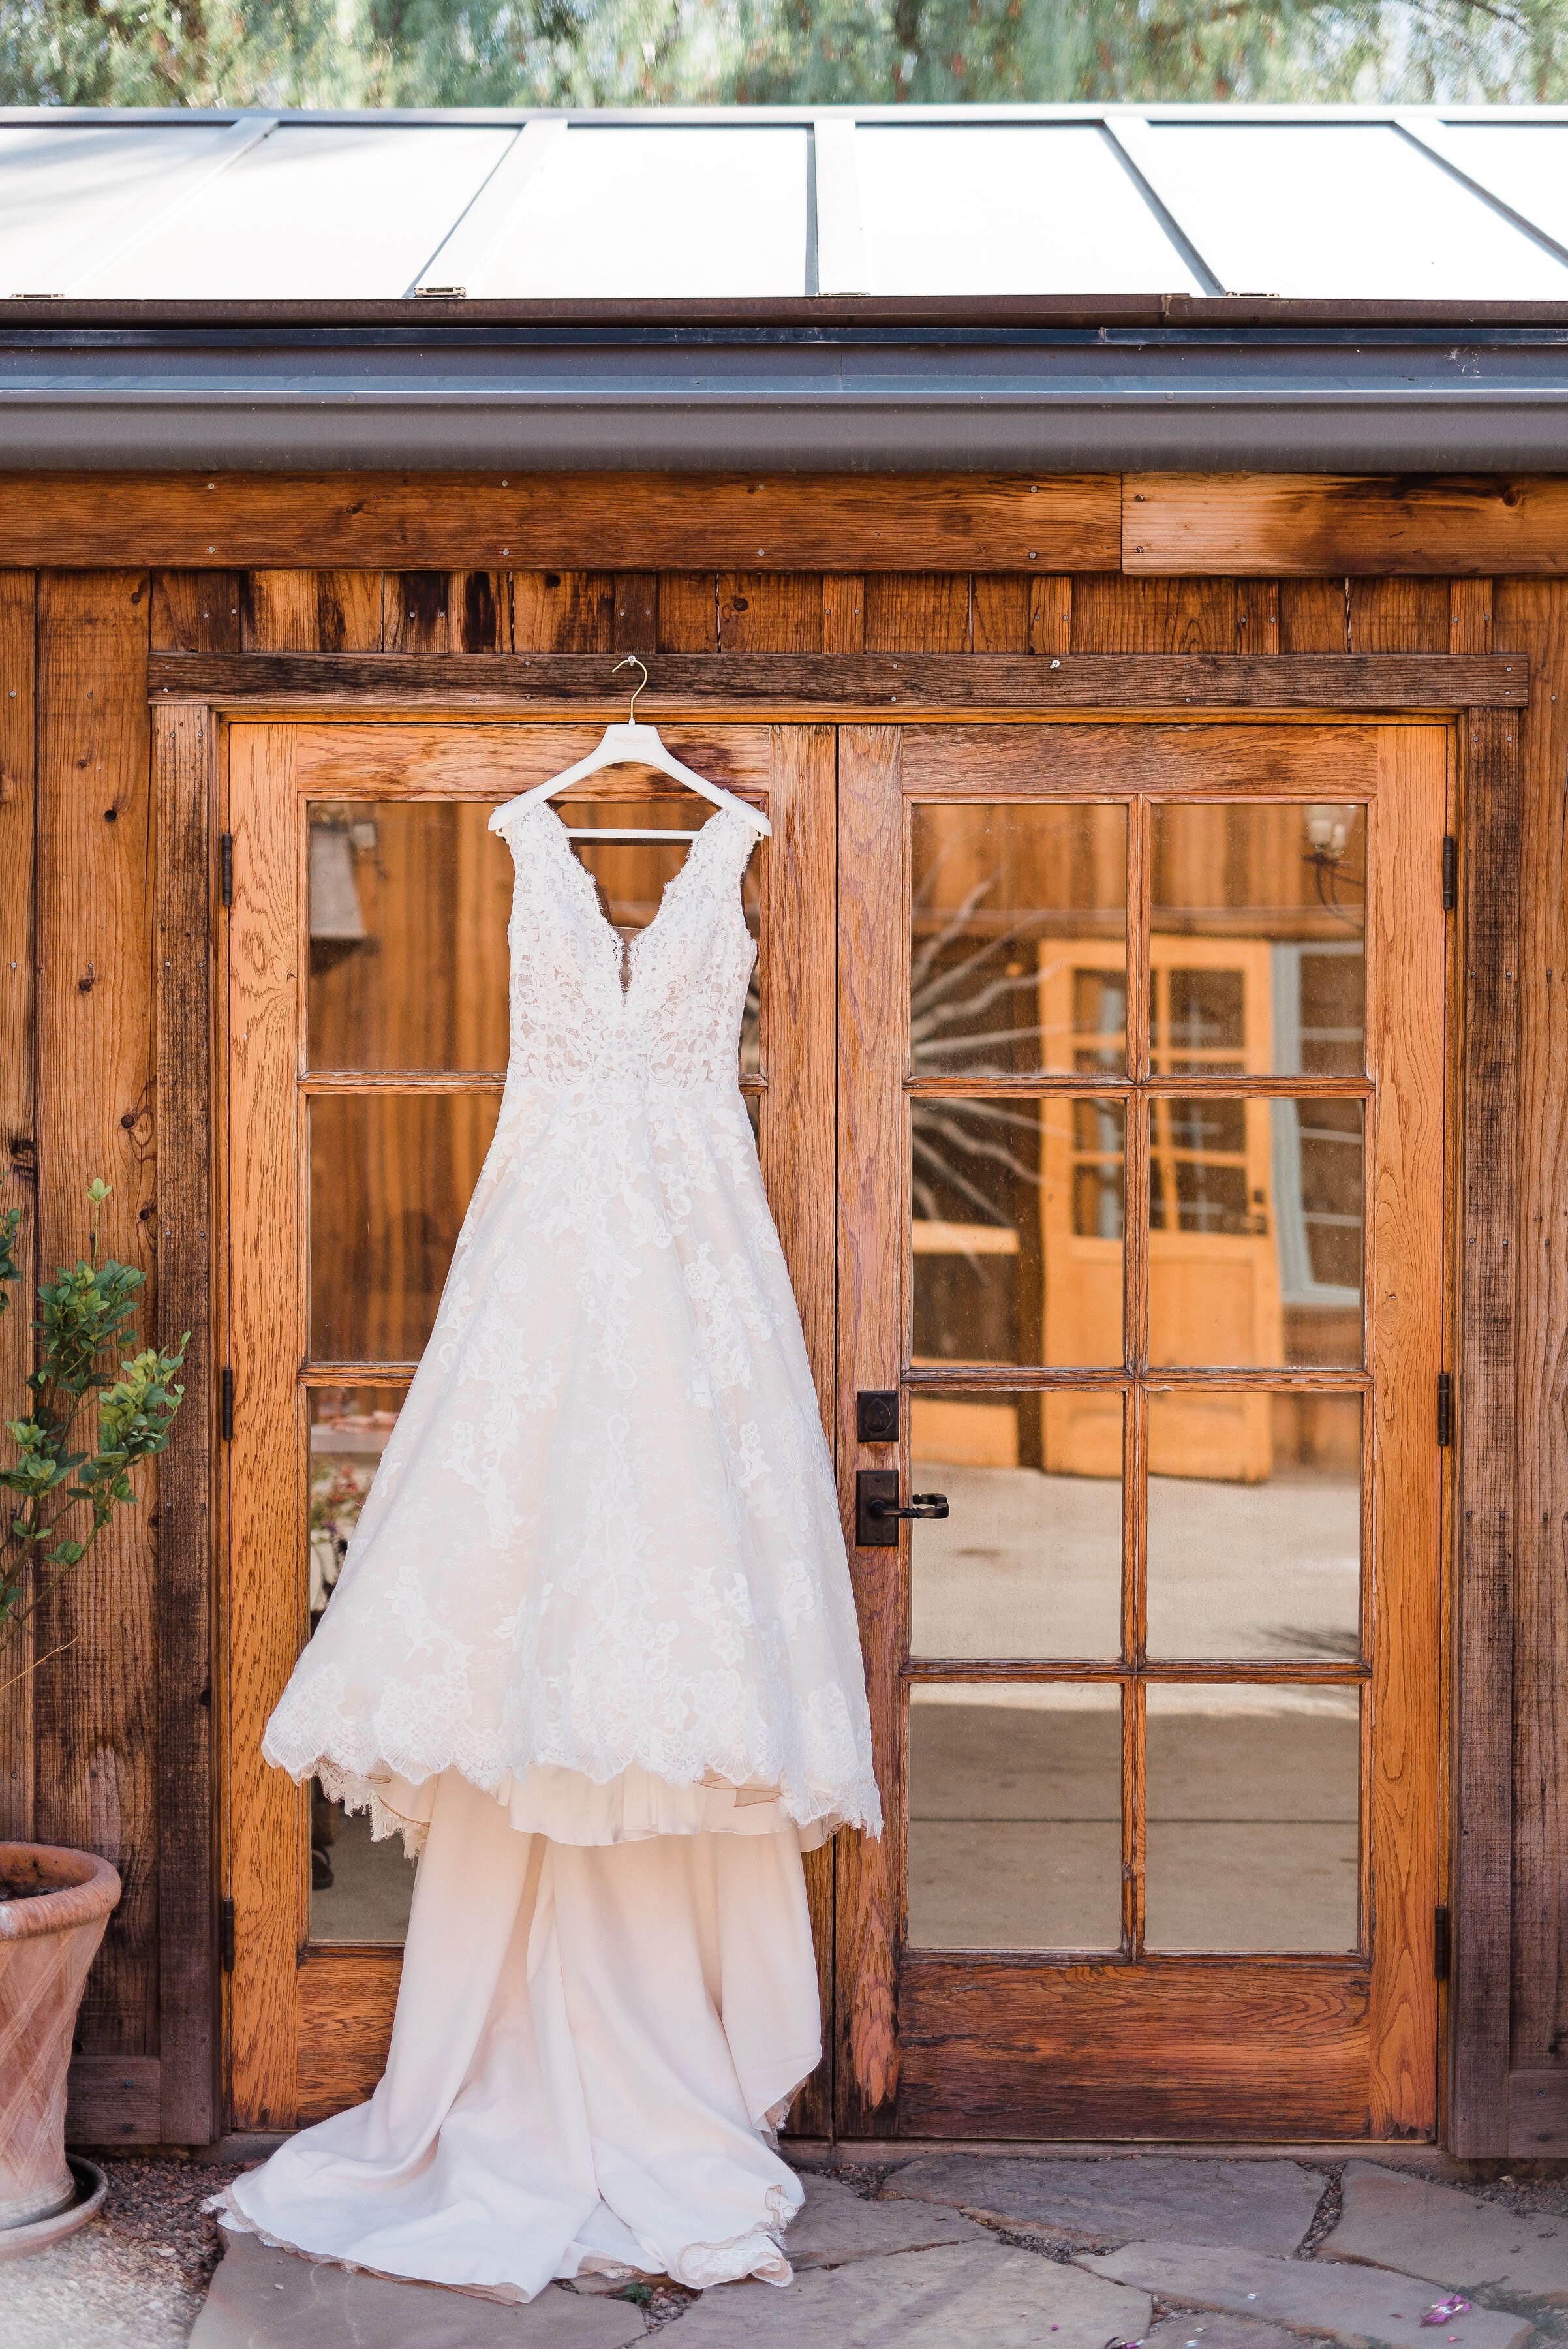 www.santabarbarawedding.com | Roblar Winery and Farm | Brittany Taylor Photography | Bride’s Wedding Gown Hanging from the Door